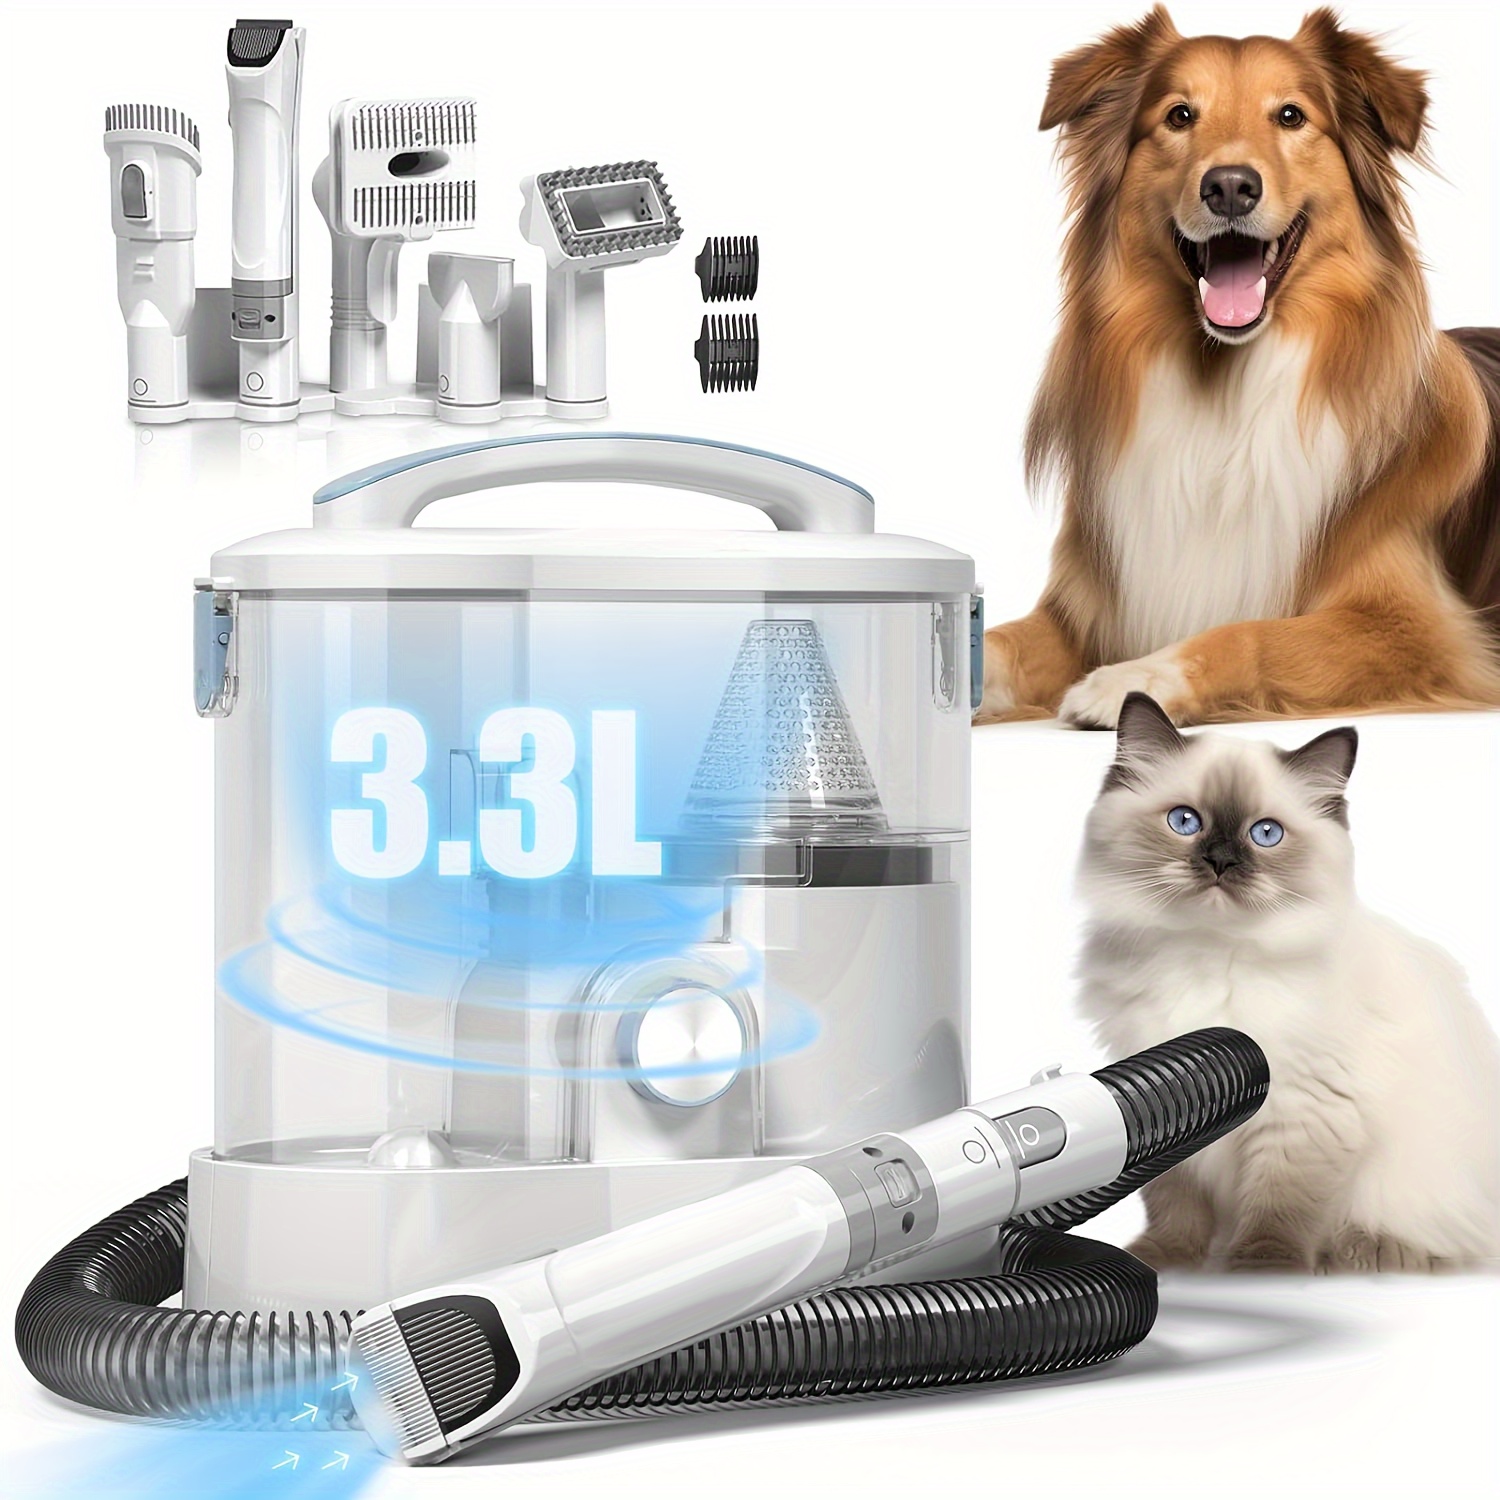 

Dog Grooming Vacuum & Pet Grooming Vacuum, Pet Grooming Vacuum For Dogs & Dog Grooming Clippers, 3.3l Dust Cup Dog Brush Vacuum With 6 Pet Grooming Tools For Shedding Pet Hair, Home Cleaning